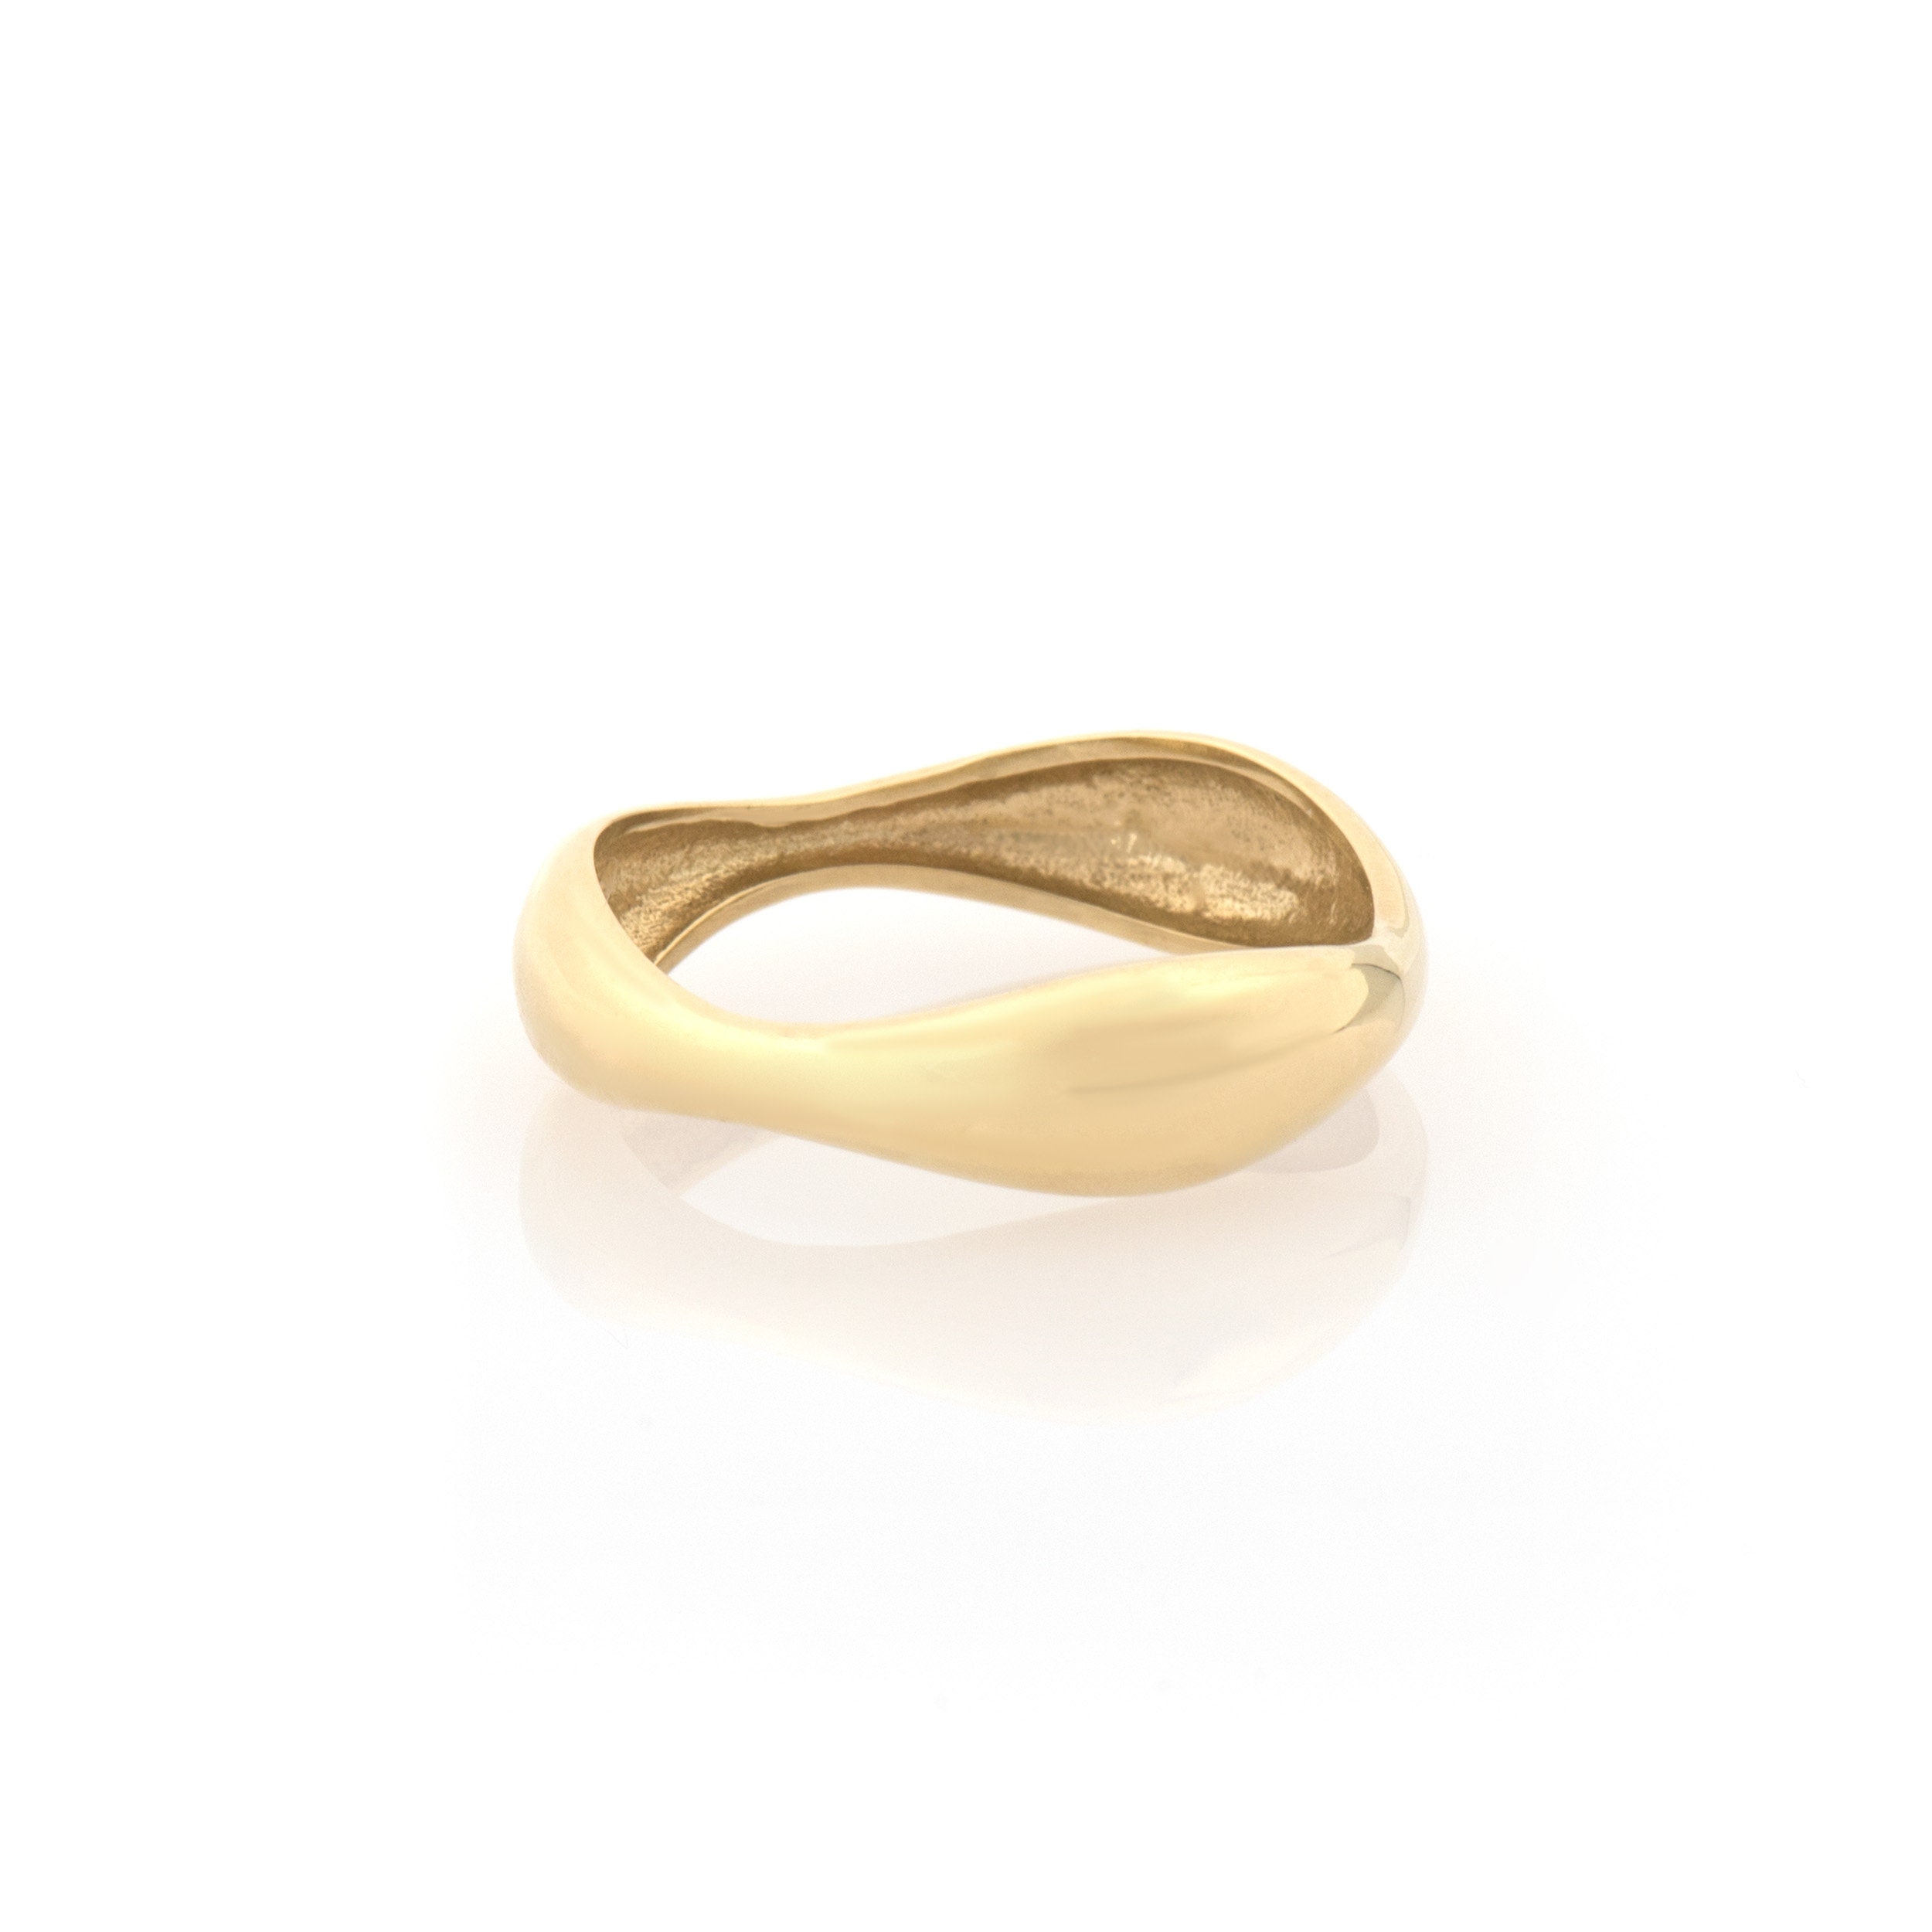 14k Gold Dome Ring / Triple Dome Ring Gold / Statement Ring / Gold ...